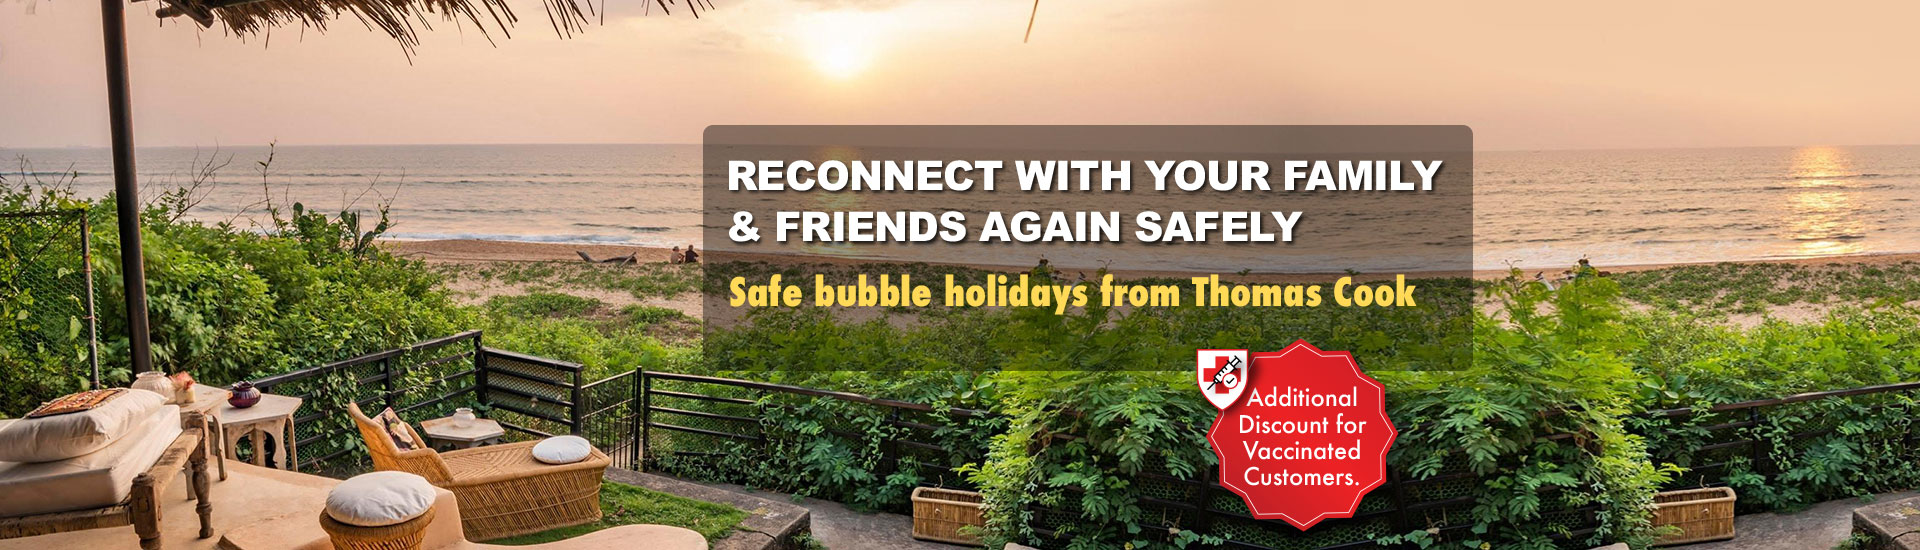 Safe bubble holidays from Thomas Cook. Additional discount for vaccinated customers.